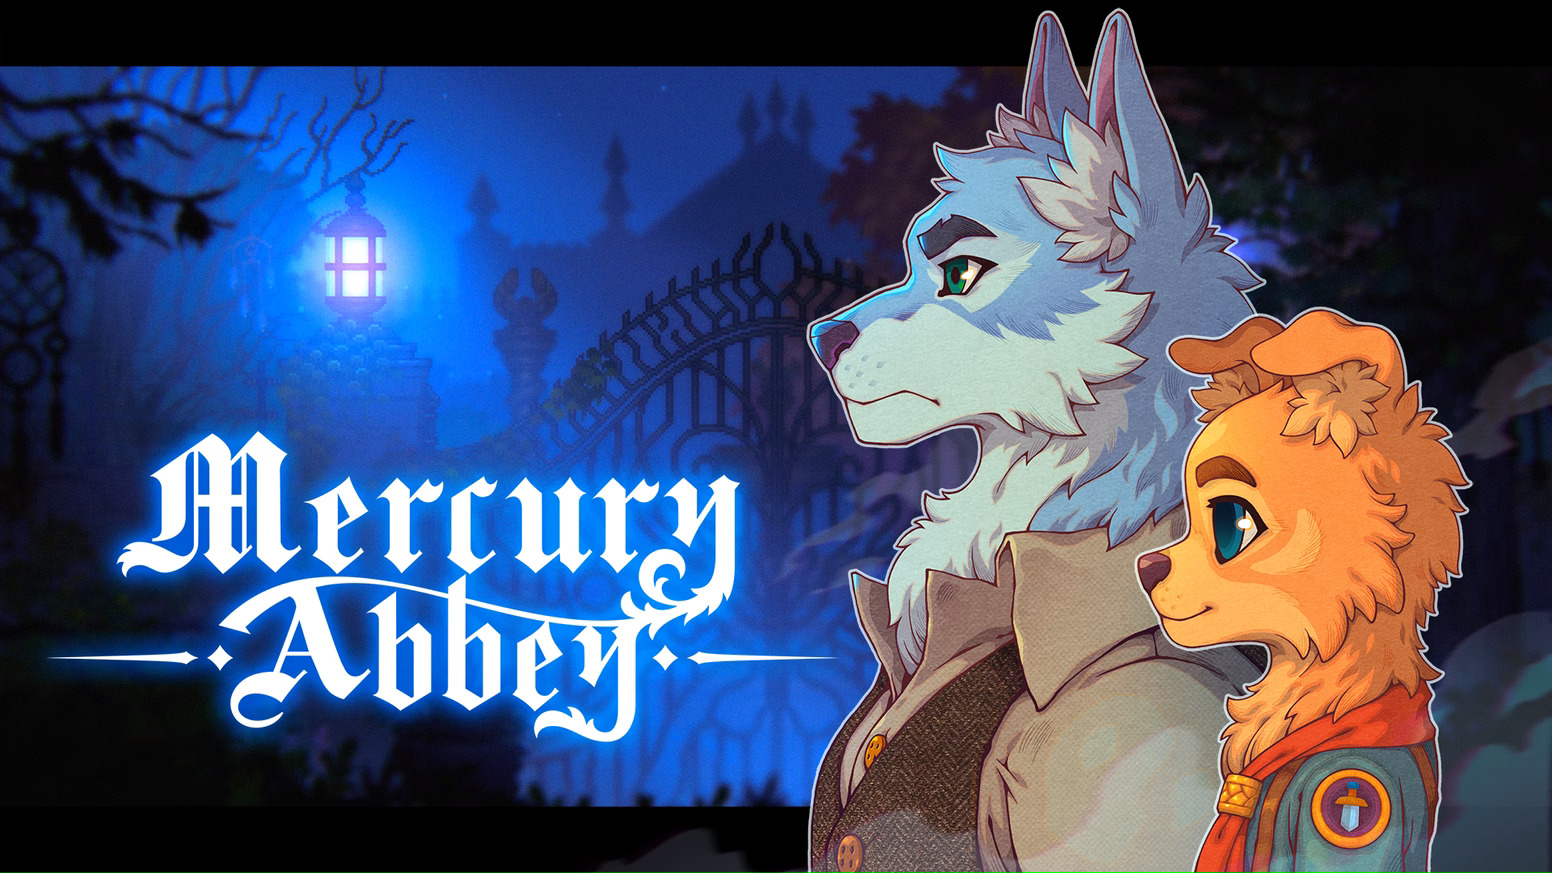 Mercury Abbey's Mystery News Indie Game Fans